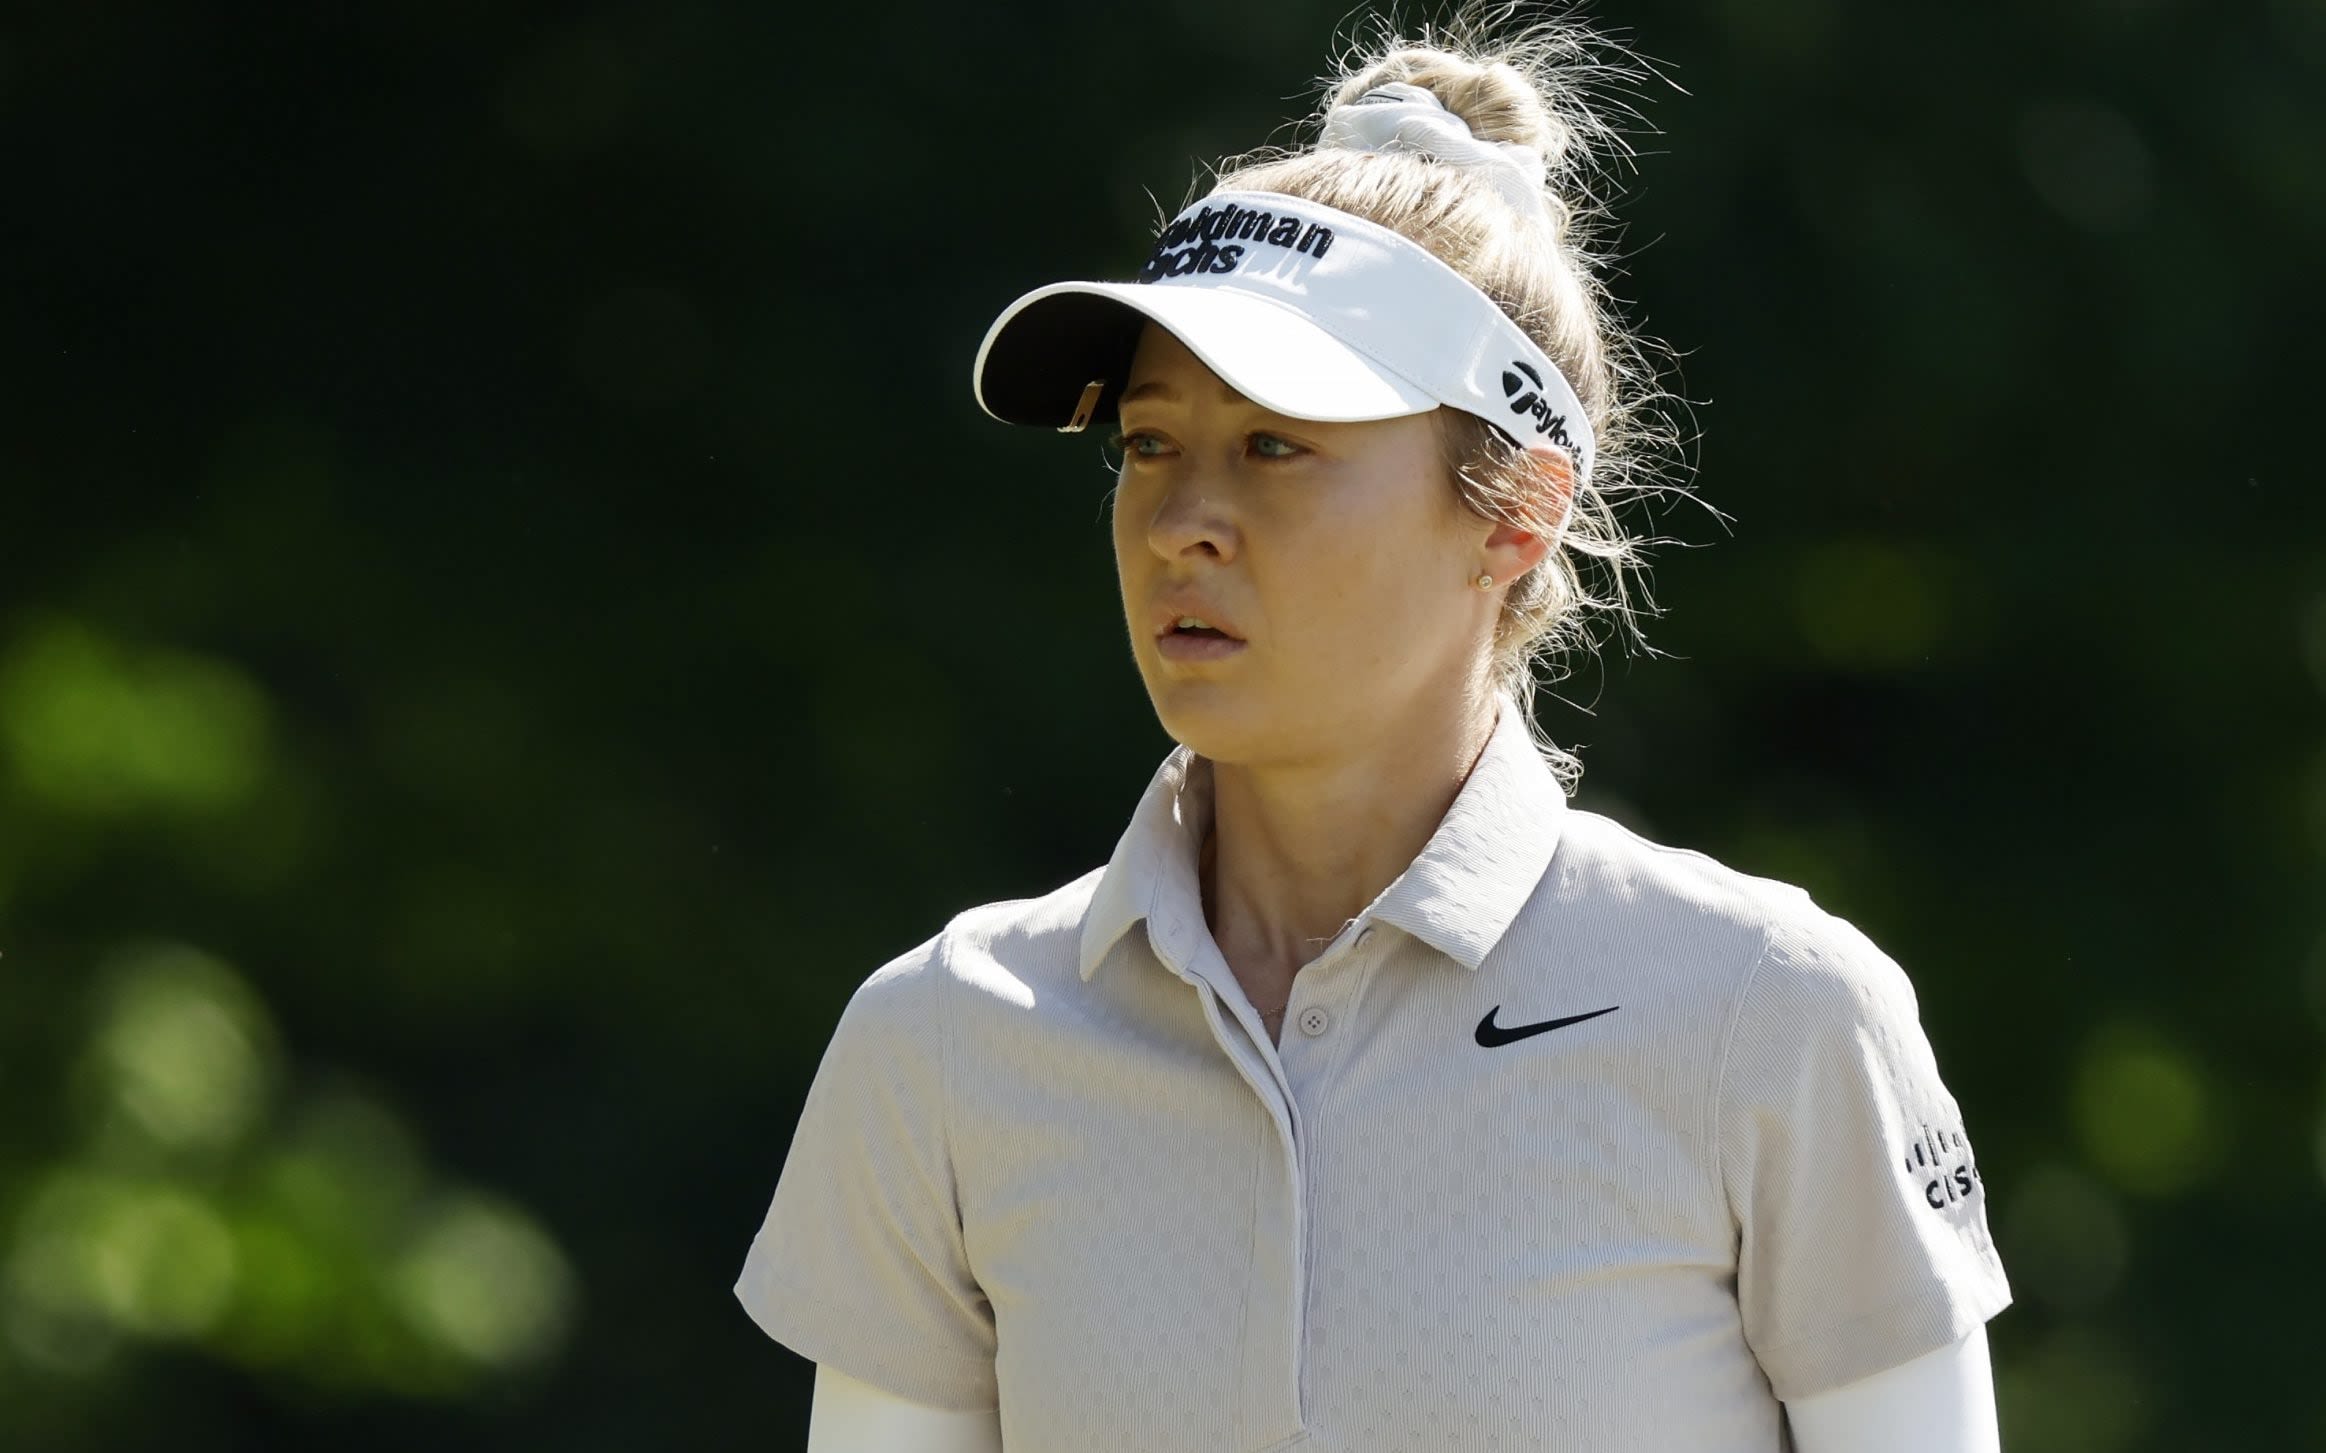 World’s best Nelly Korda hits into water three times on one hole at US Open